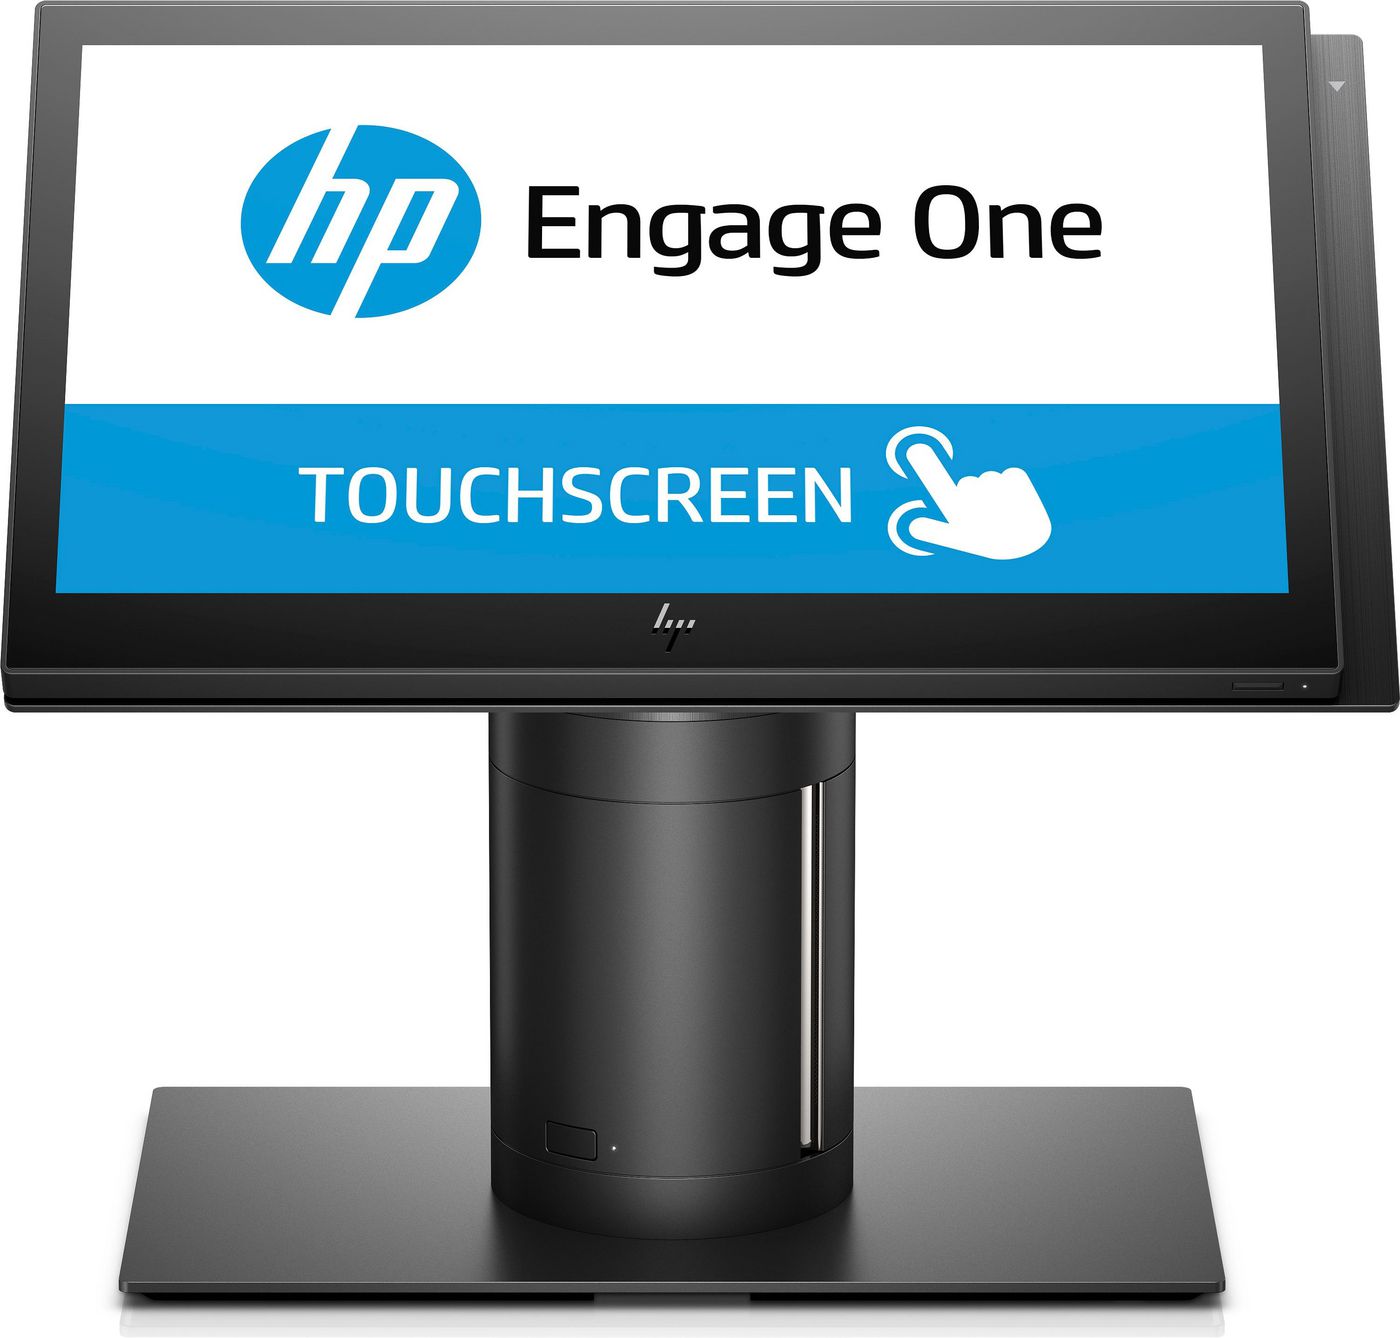 Engage One AiO System Model 141 - 14in - 3965U - 4GB RAM - 128GB SSD - Win10 IoT Ent